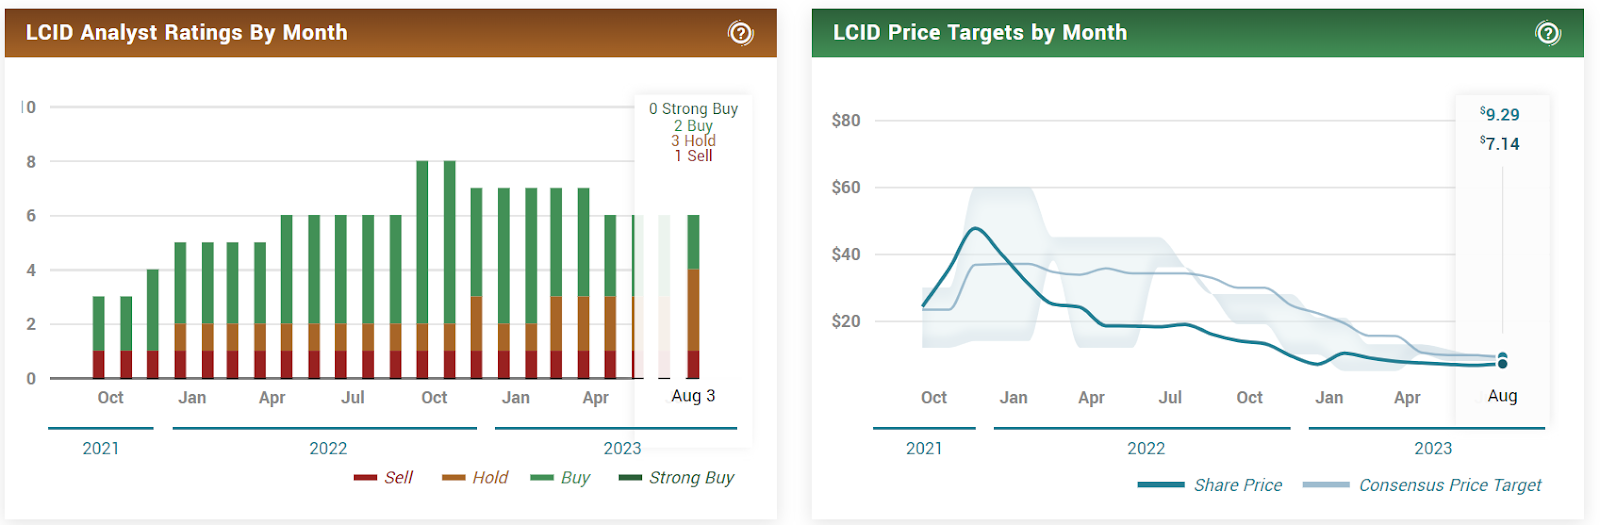 Lucid (LCID) Stock Price: What to Expect From August 7 Earnings?